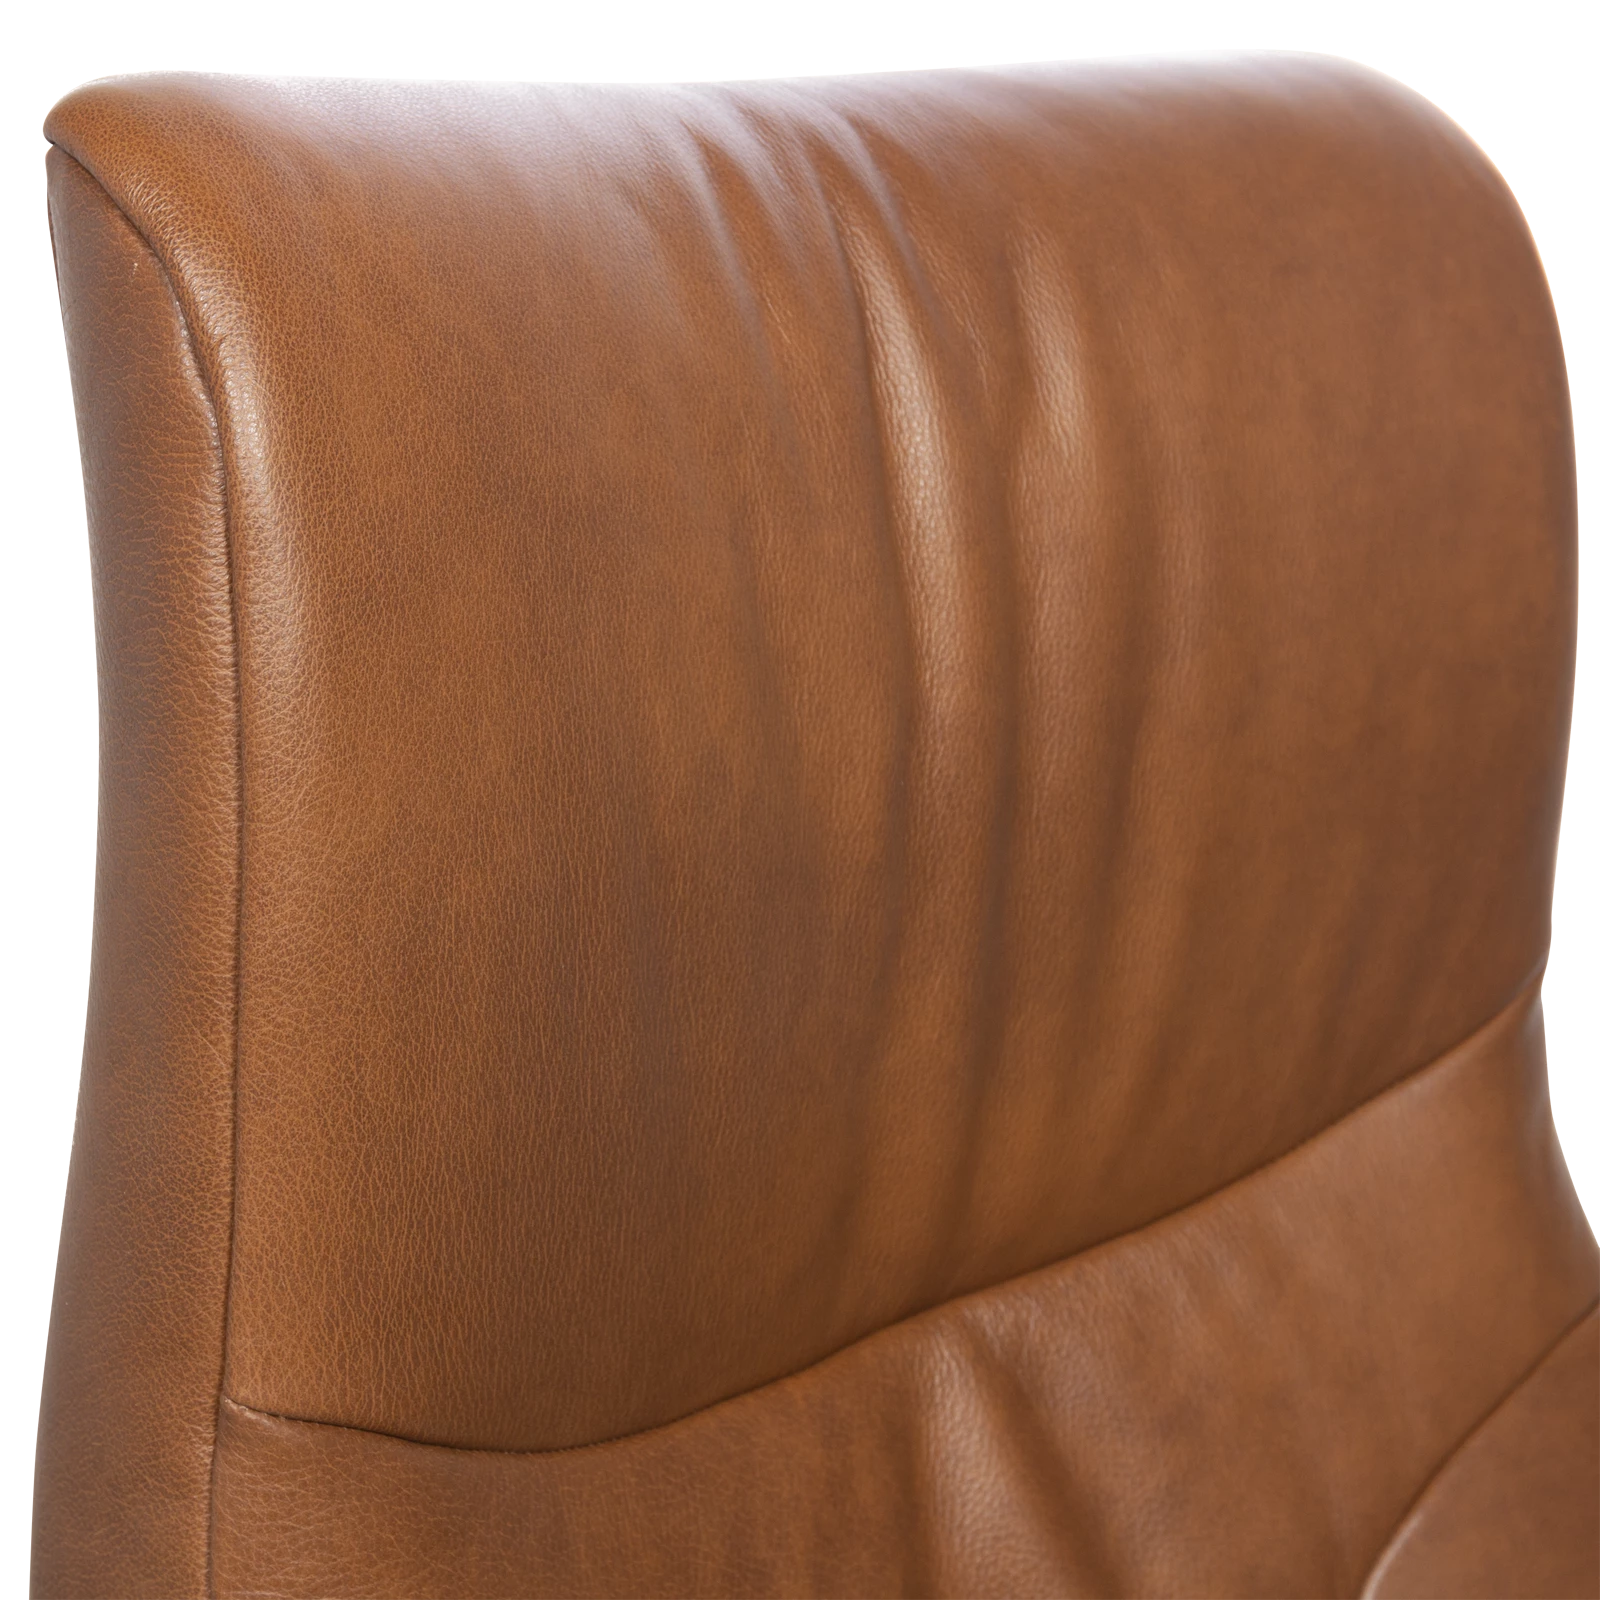 Relaxfauteuil (extra large - voet 42) Profile - Moreno Savannah